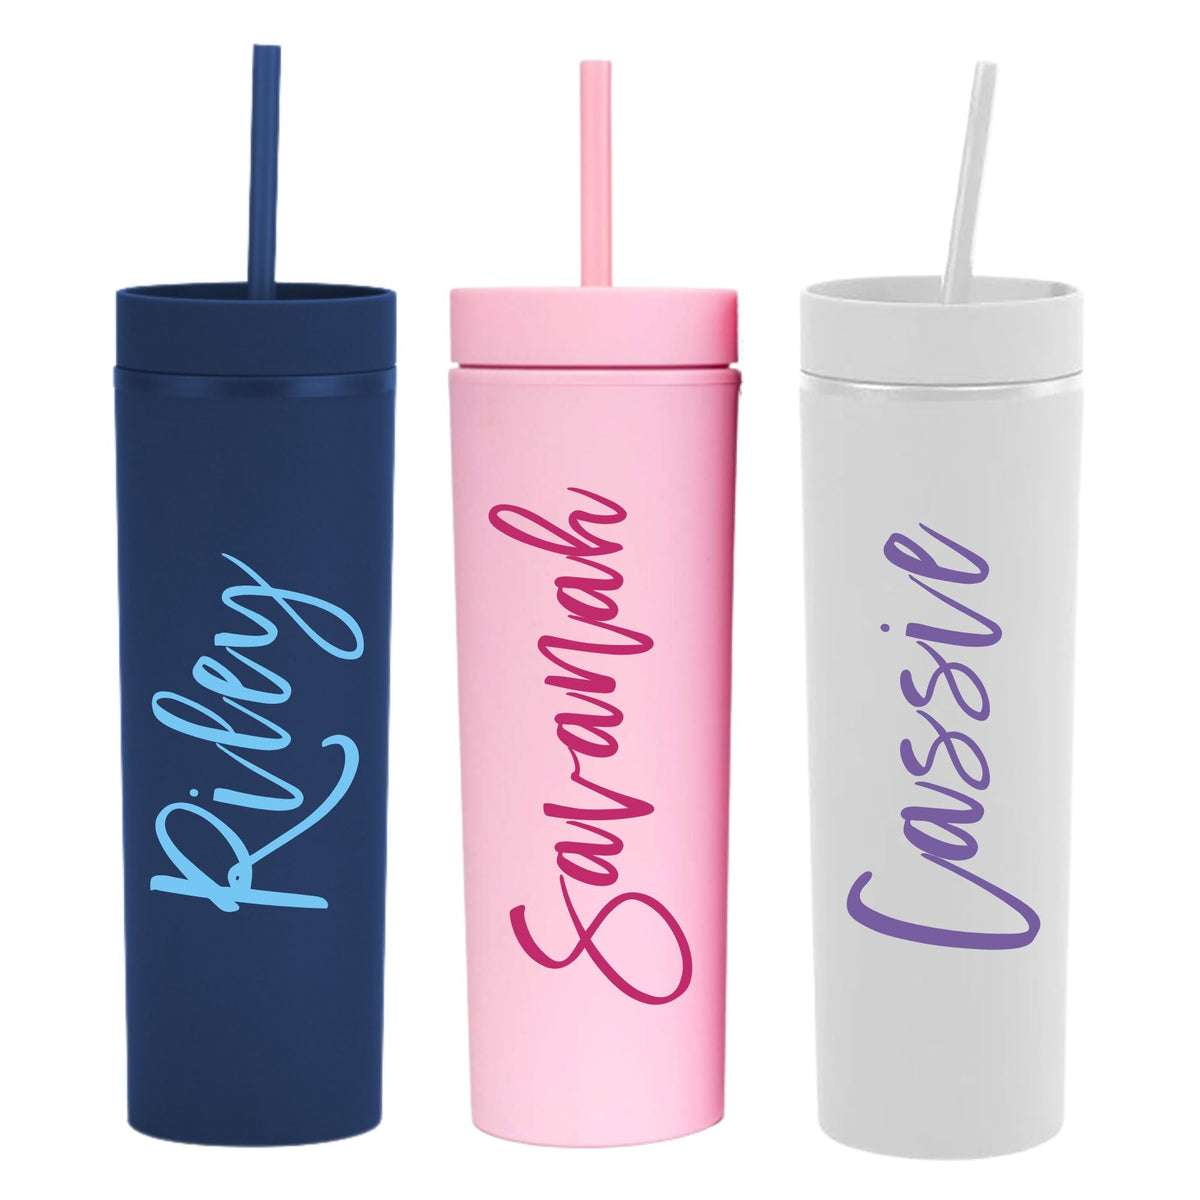 Personalized Stainless Steel Travel Mug - Trendy Script